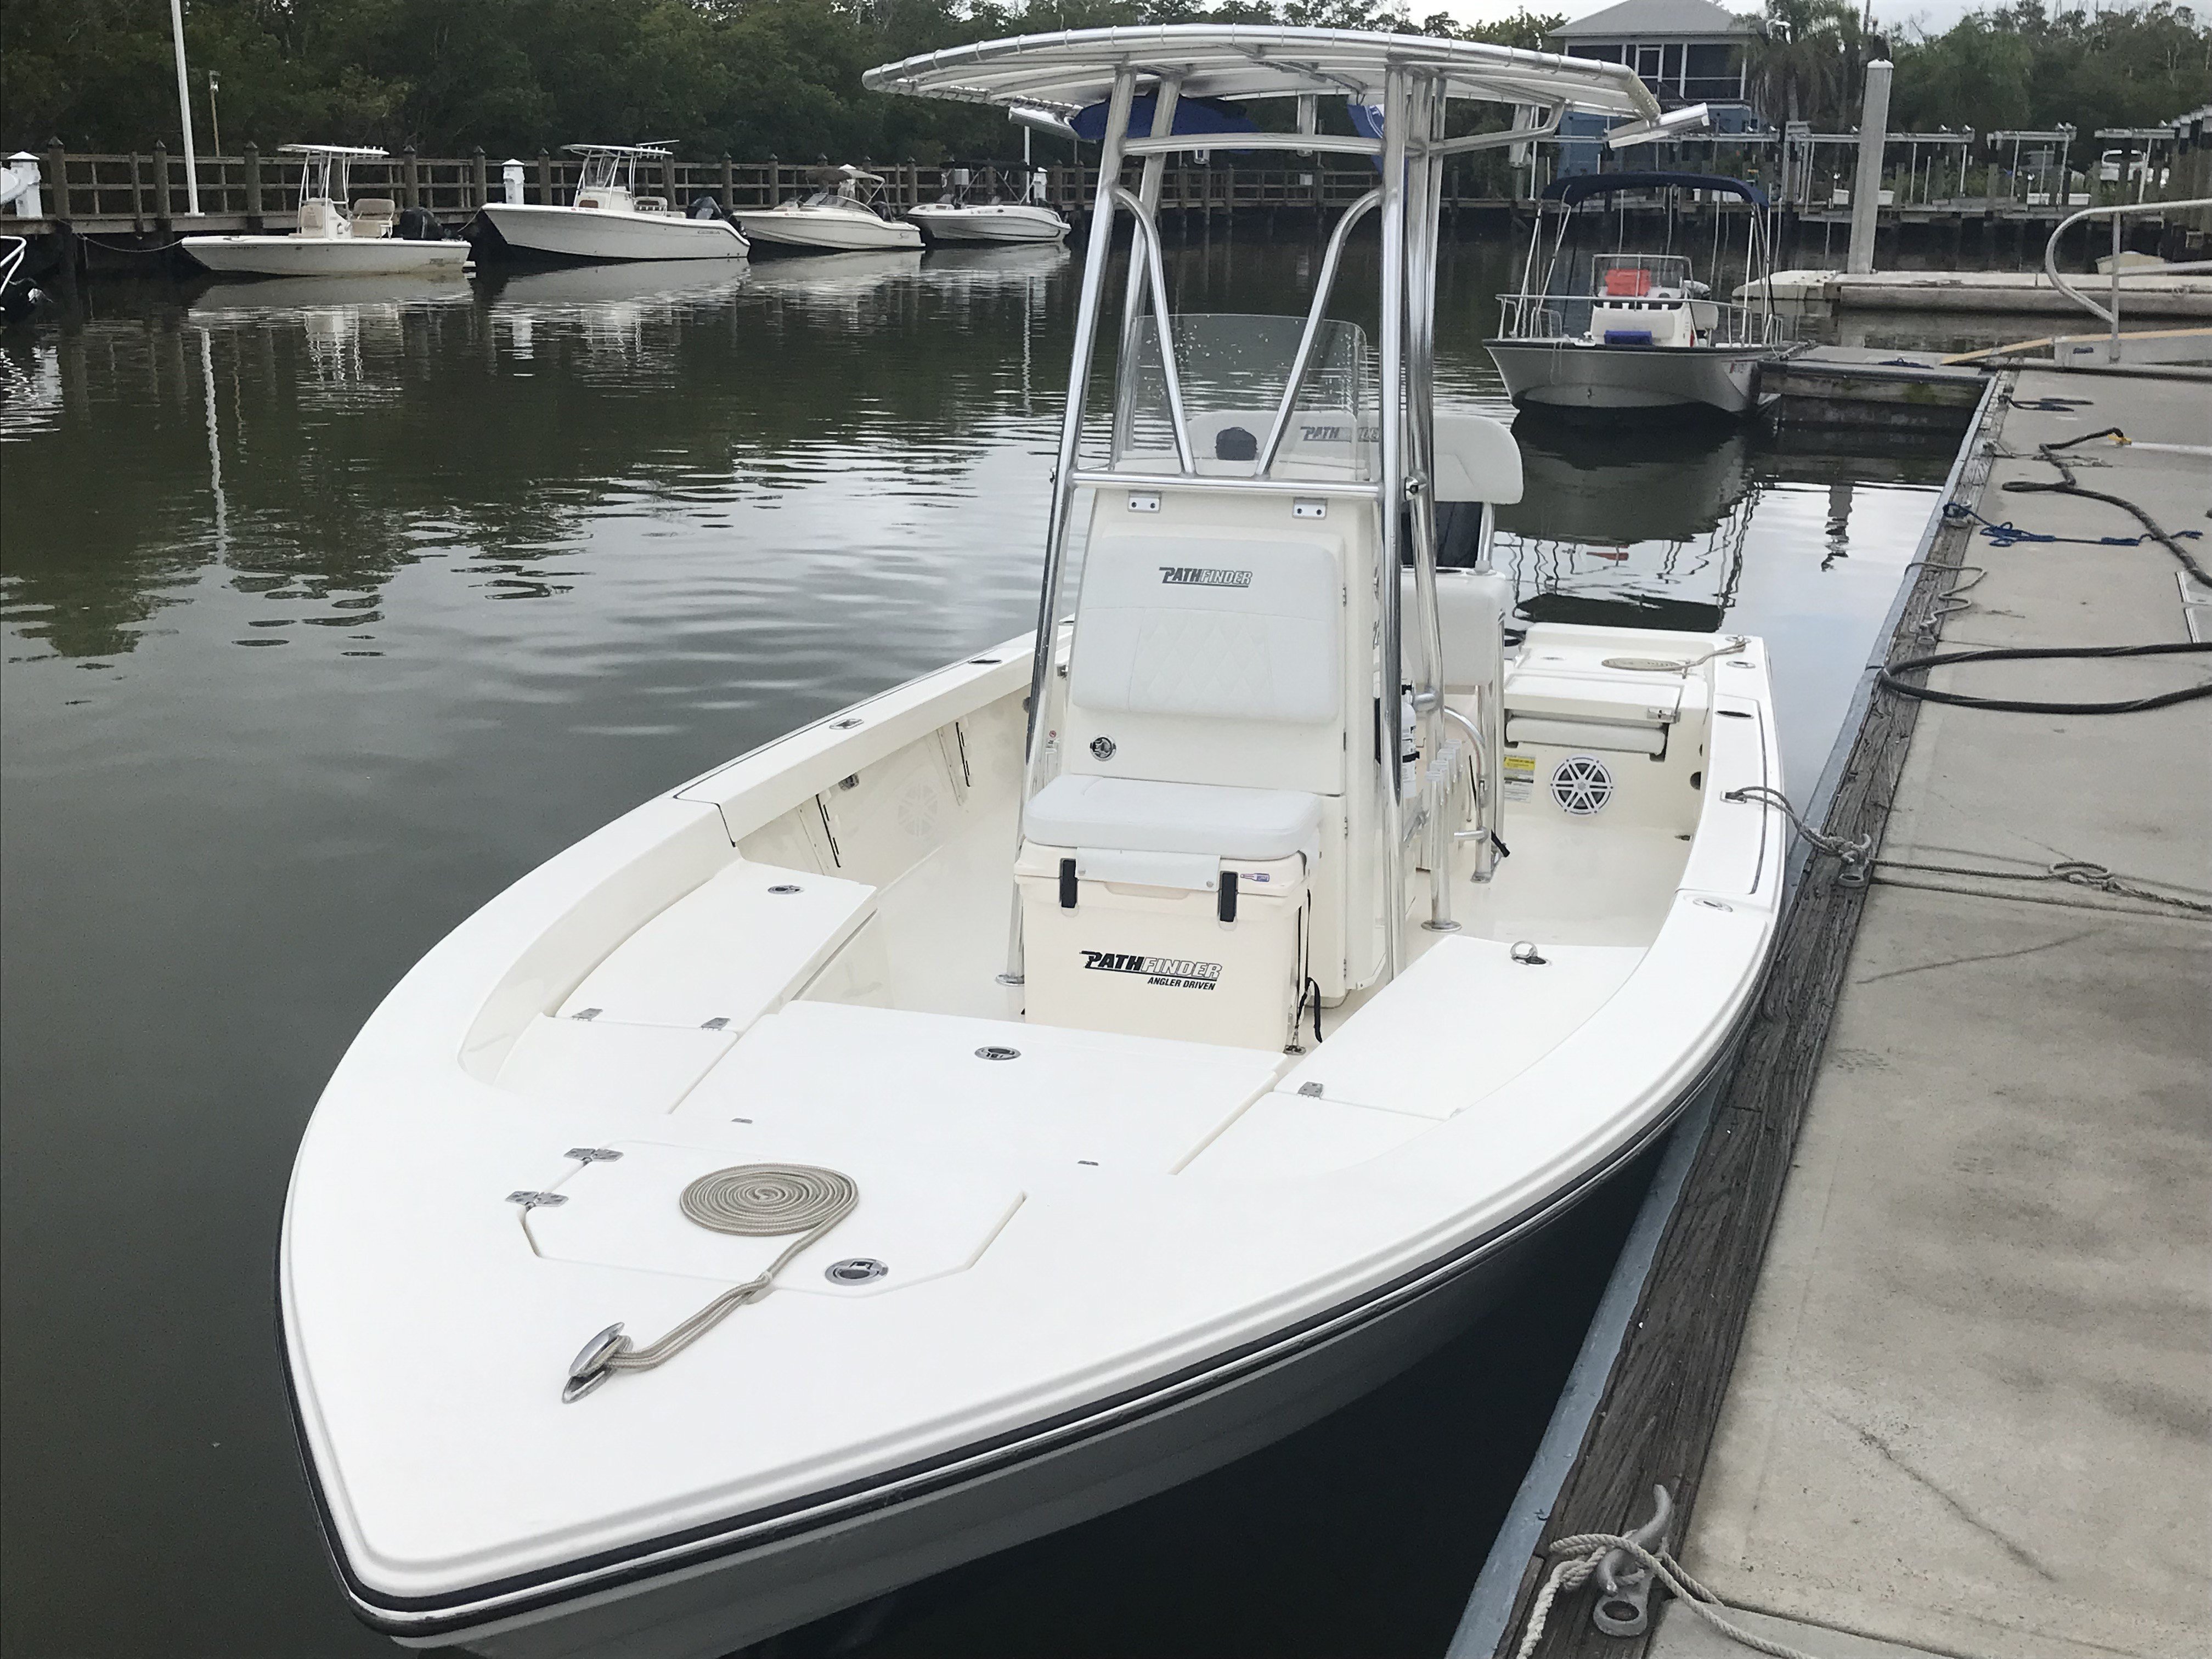 FISH 4 LIFE (22FT Center Console Pathfinder 150 HP Fishing)